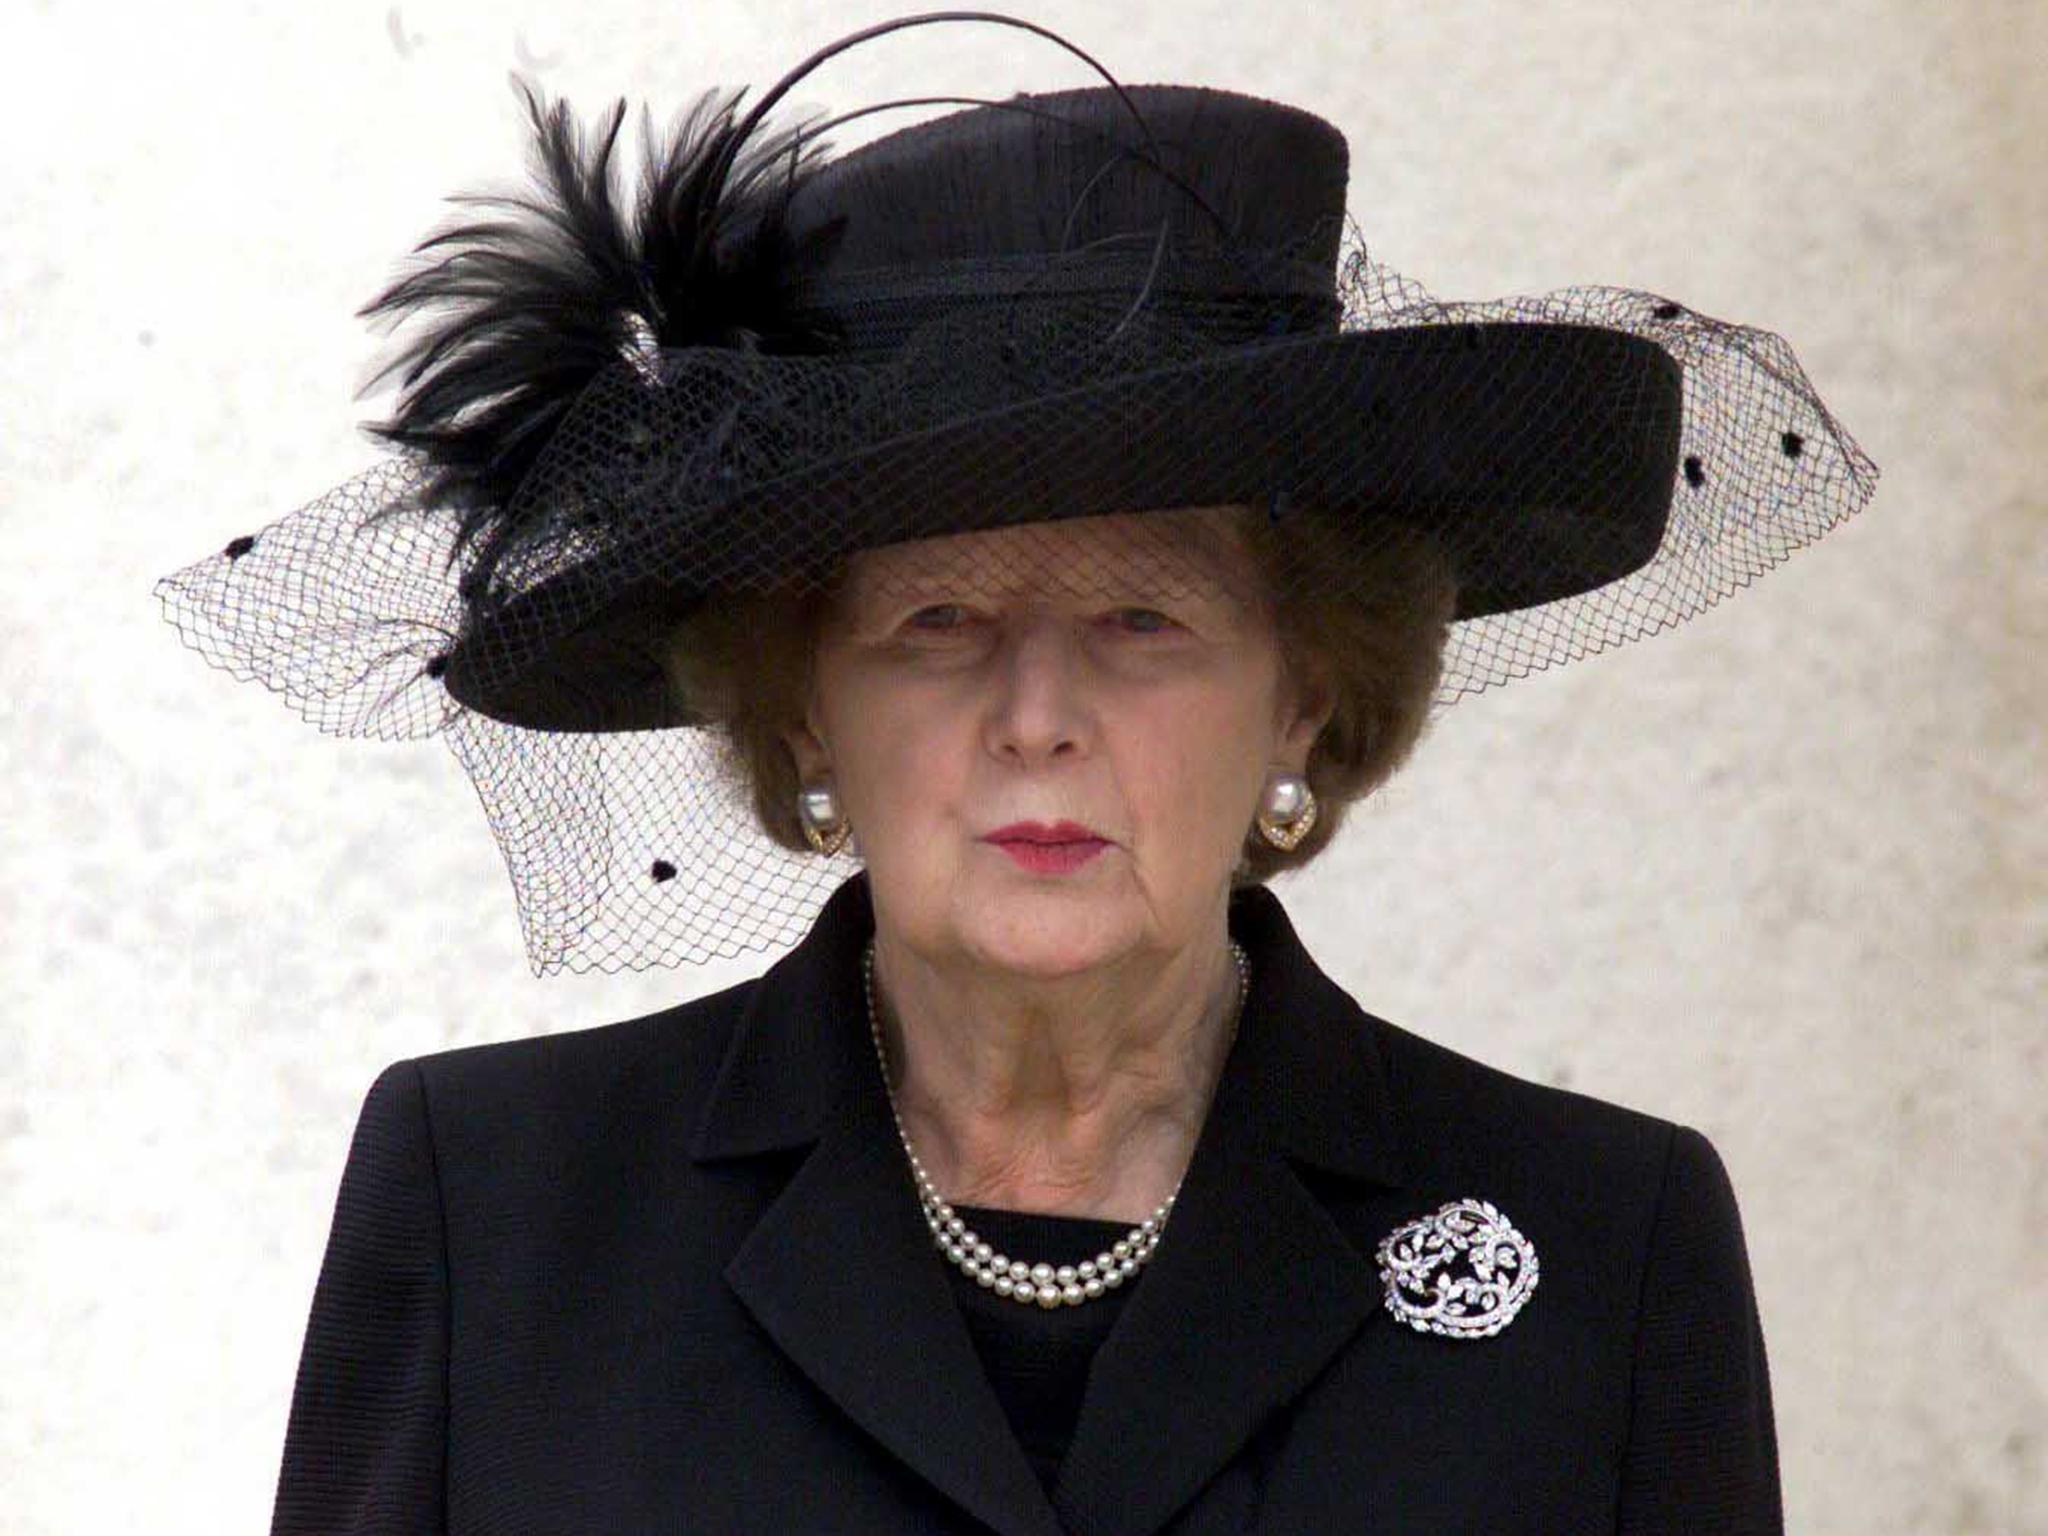 Fashion, women and power-dressing: Margaret Thatcher's impact on clothing | The Independent Independent